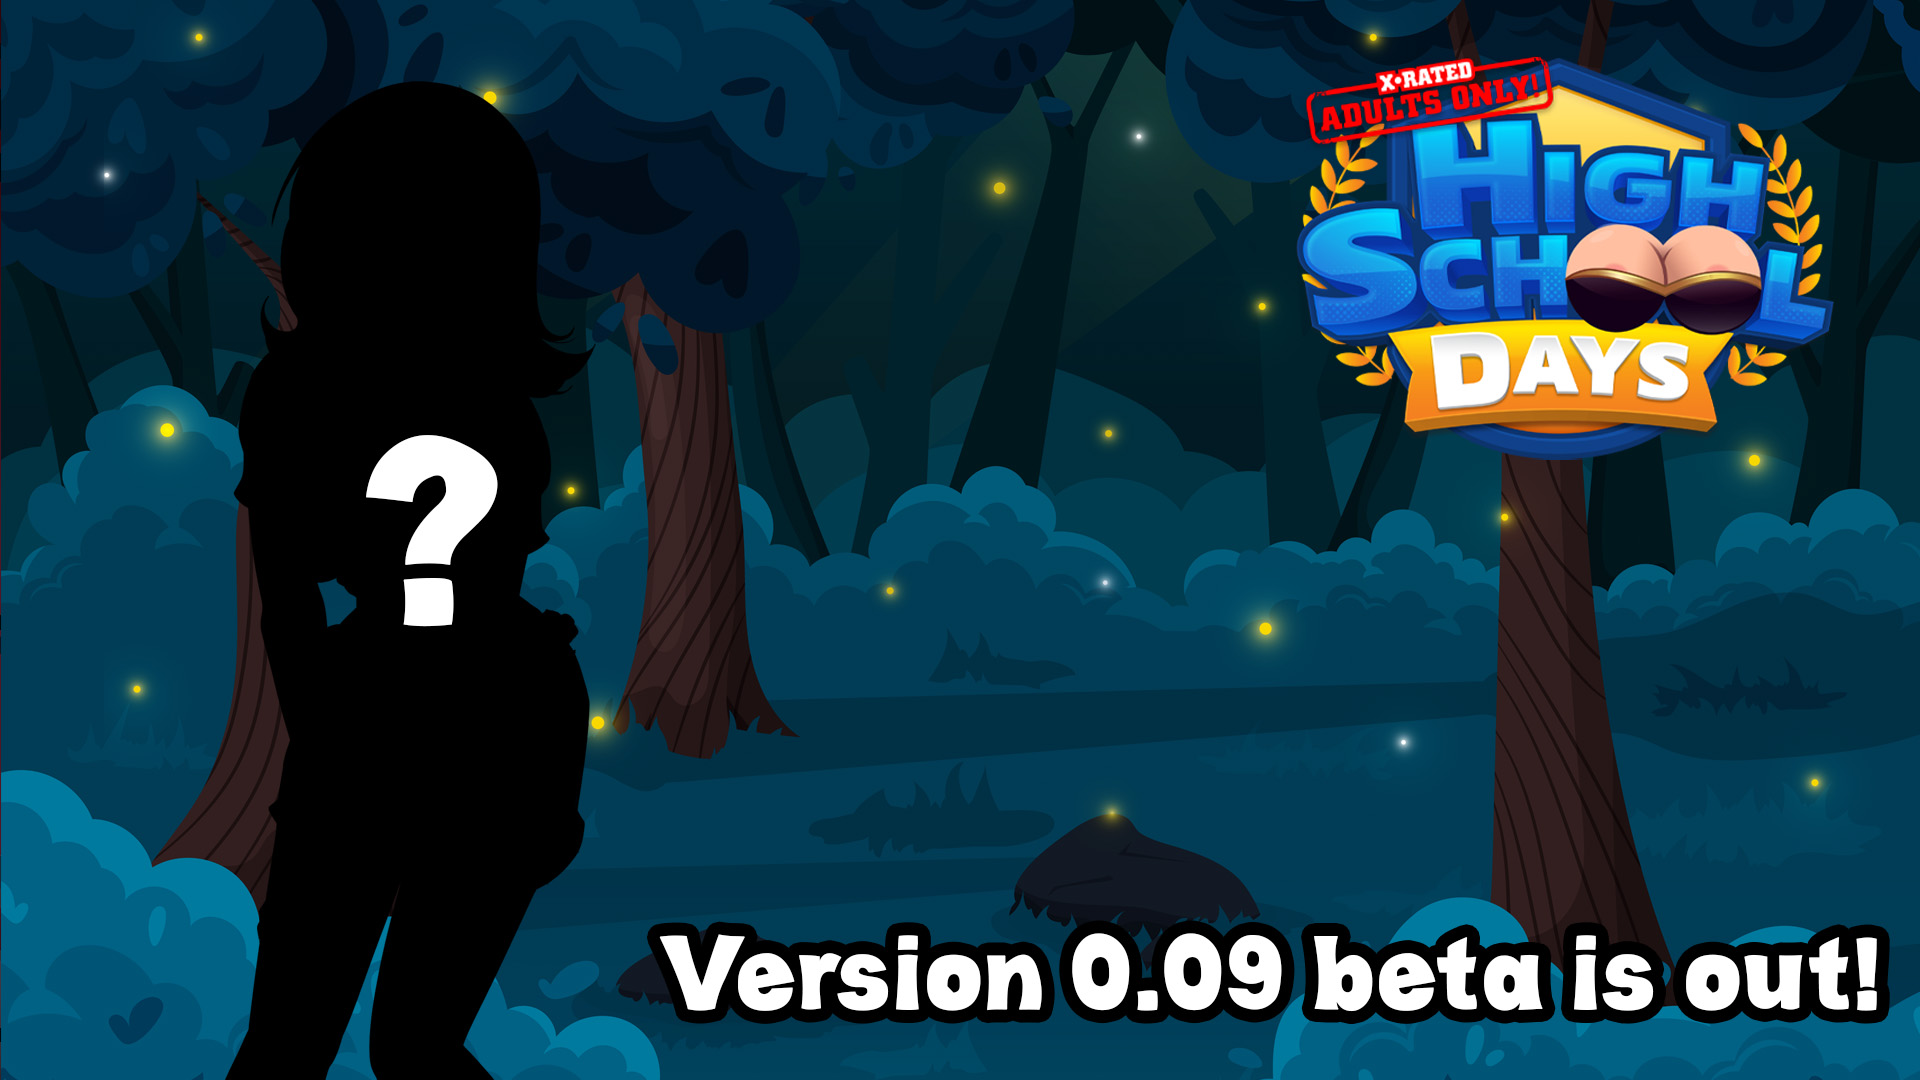 Version 0.09 beta is out!